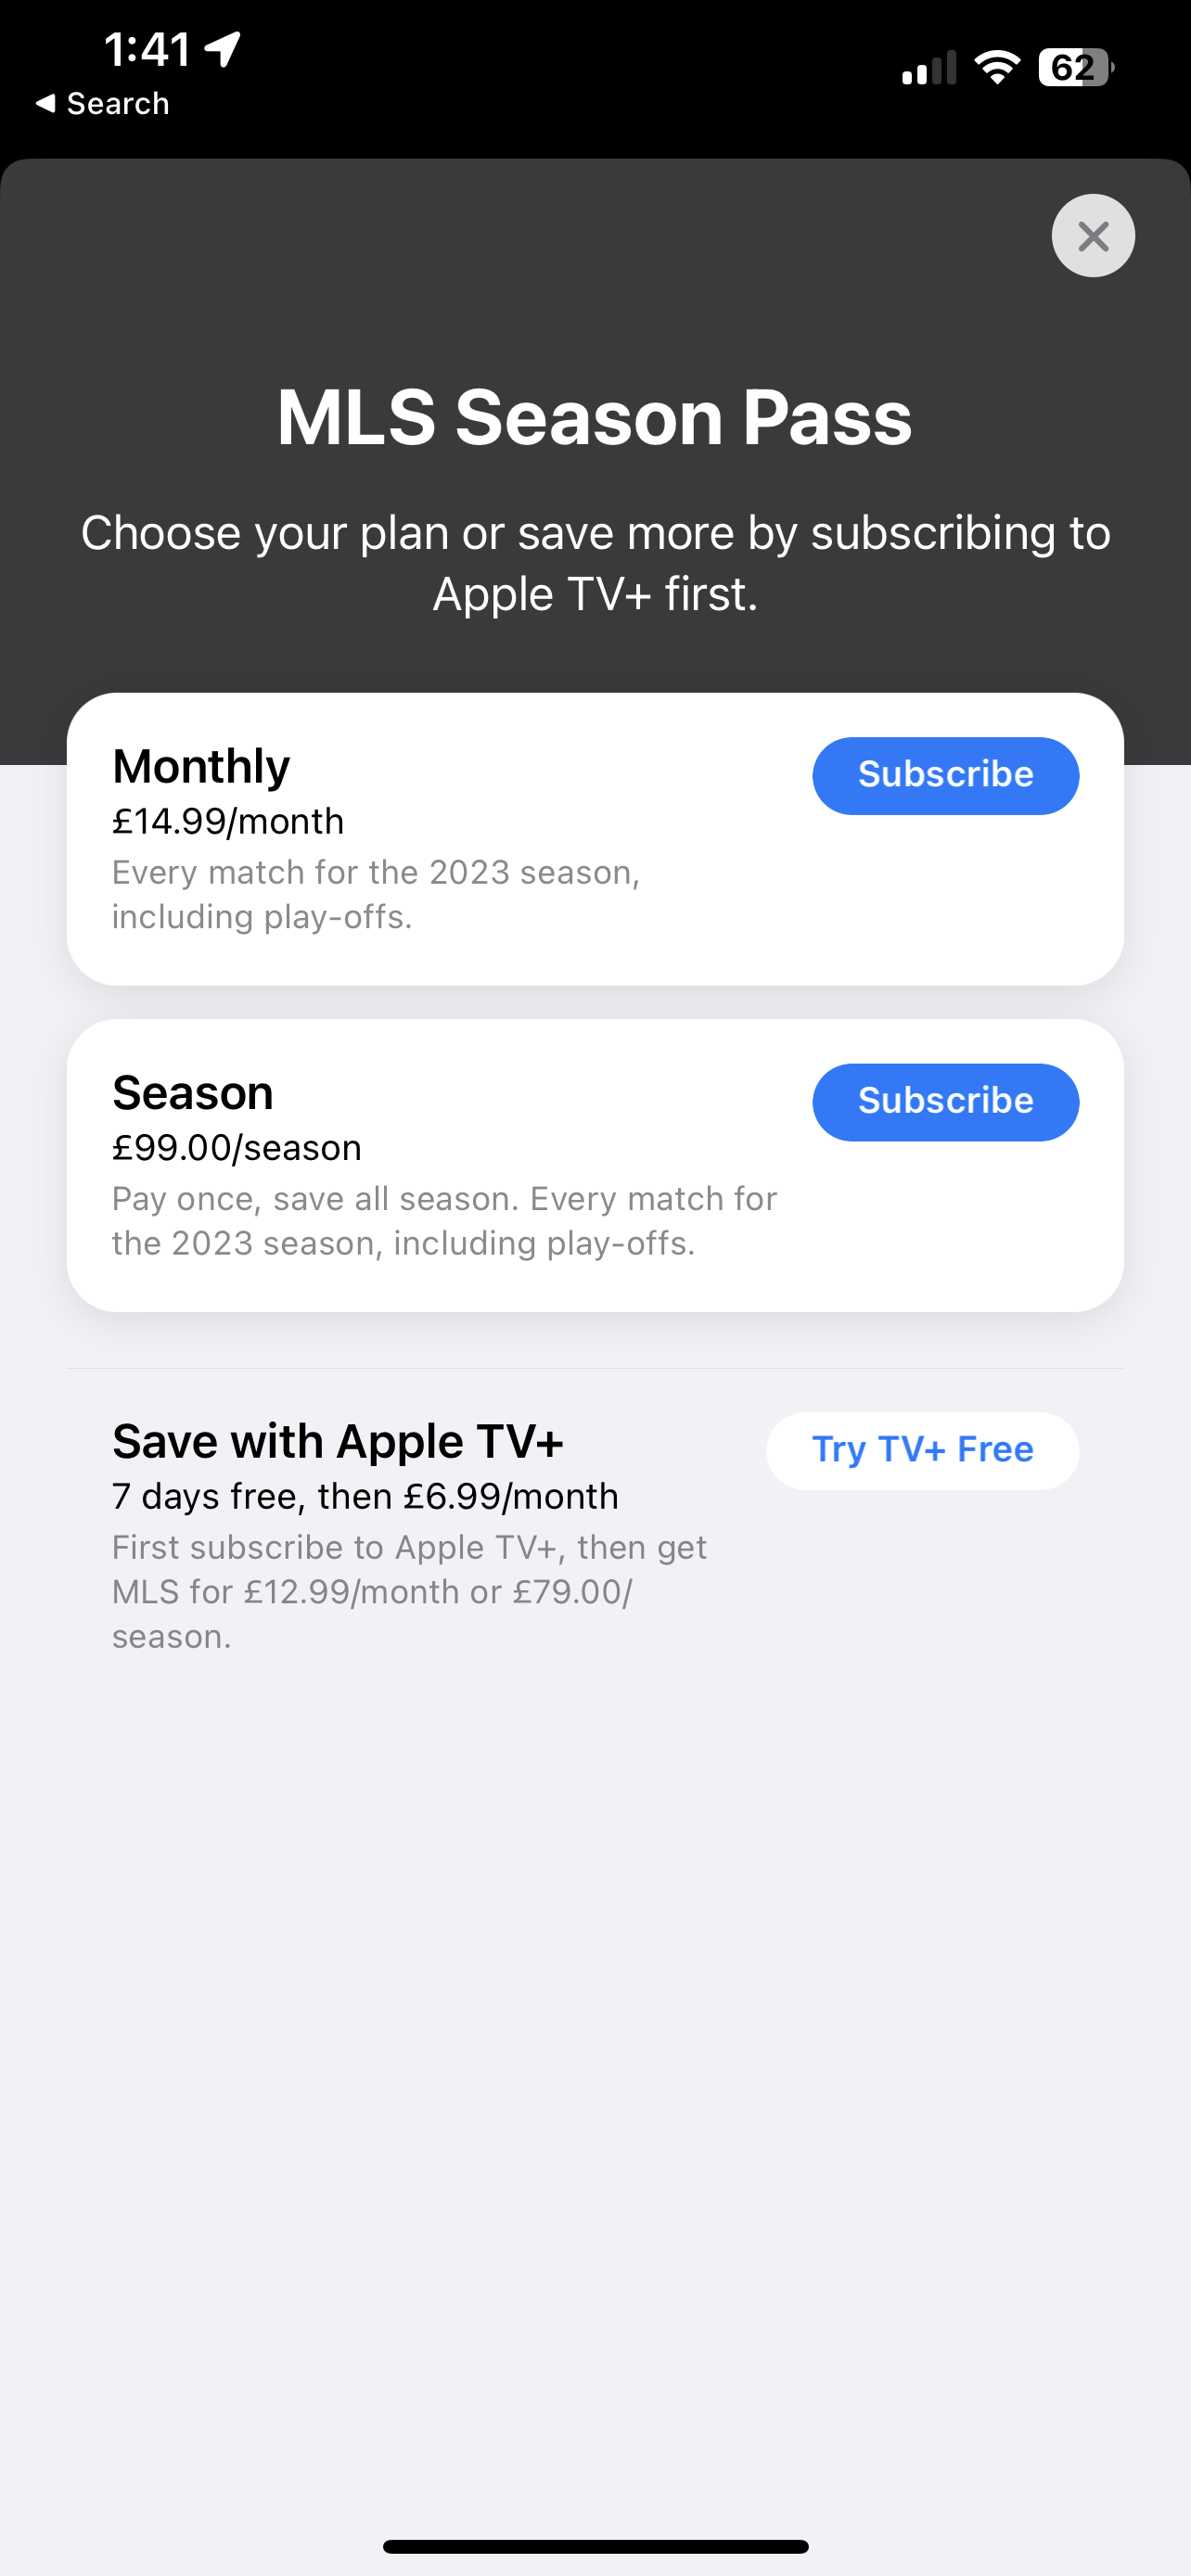 How to sign up MLS Season Pass Apple TV